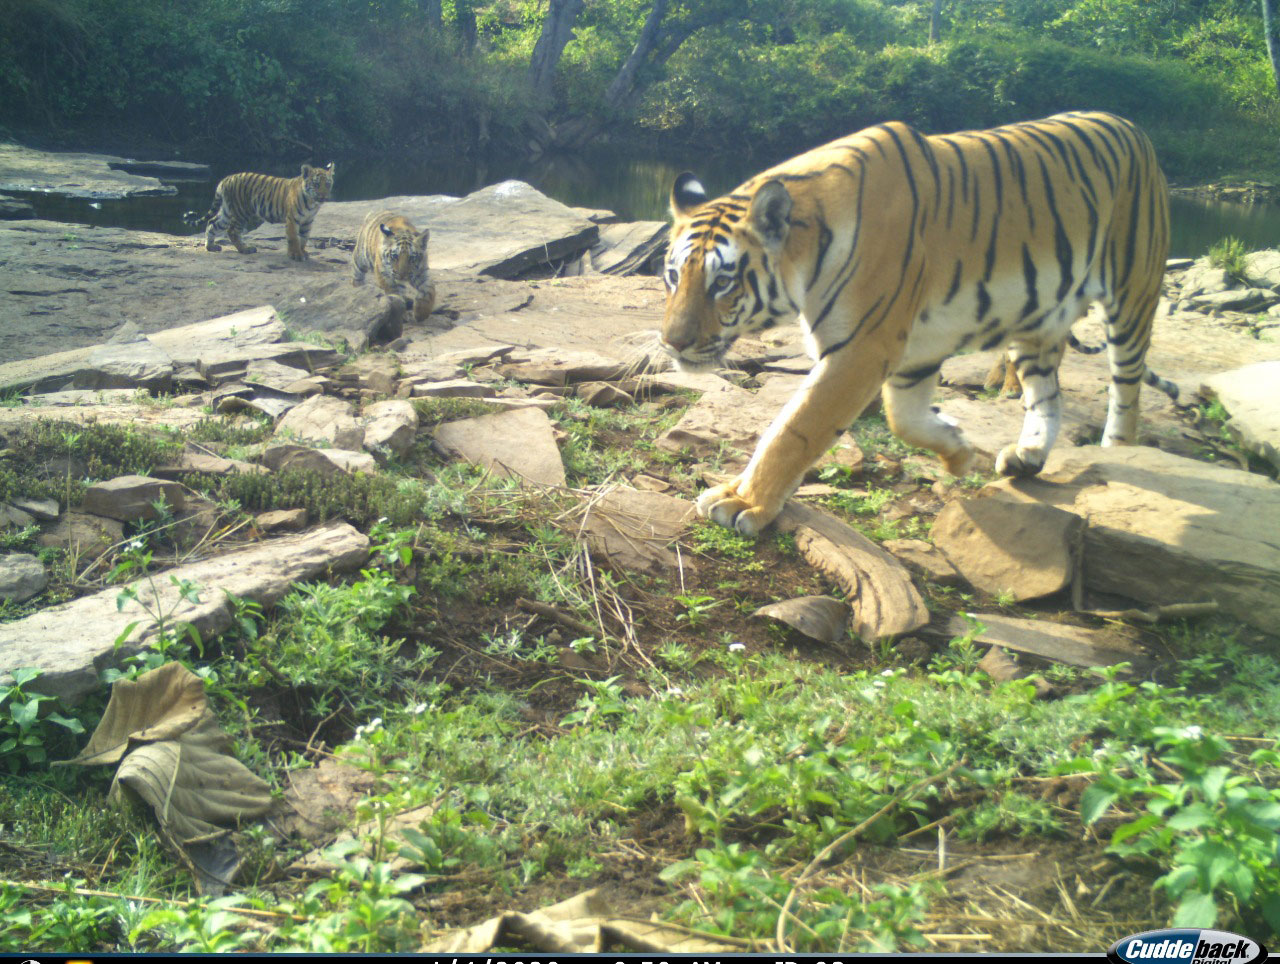 Tigress with 3 cubs captured in camera